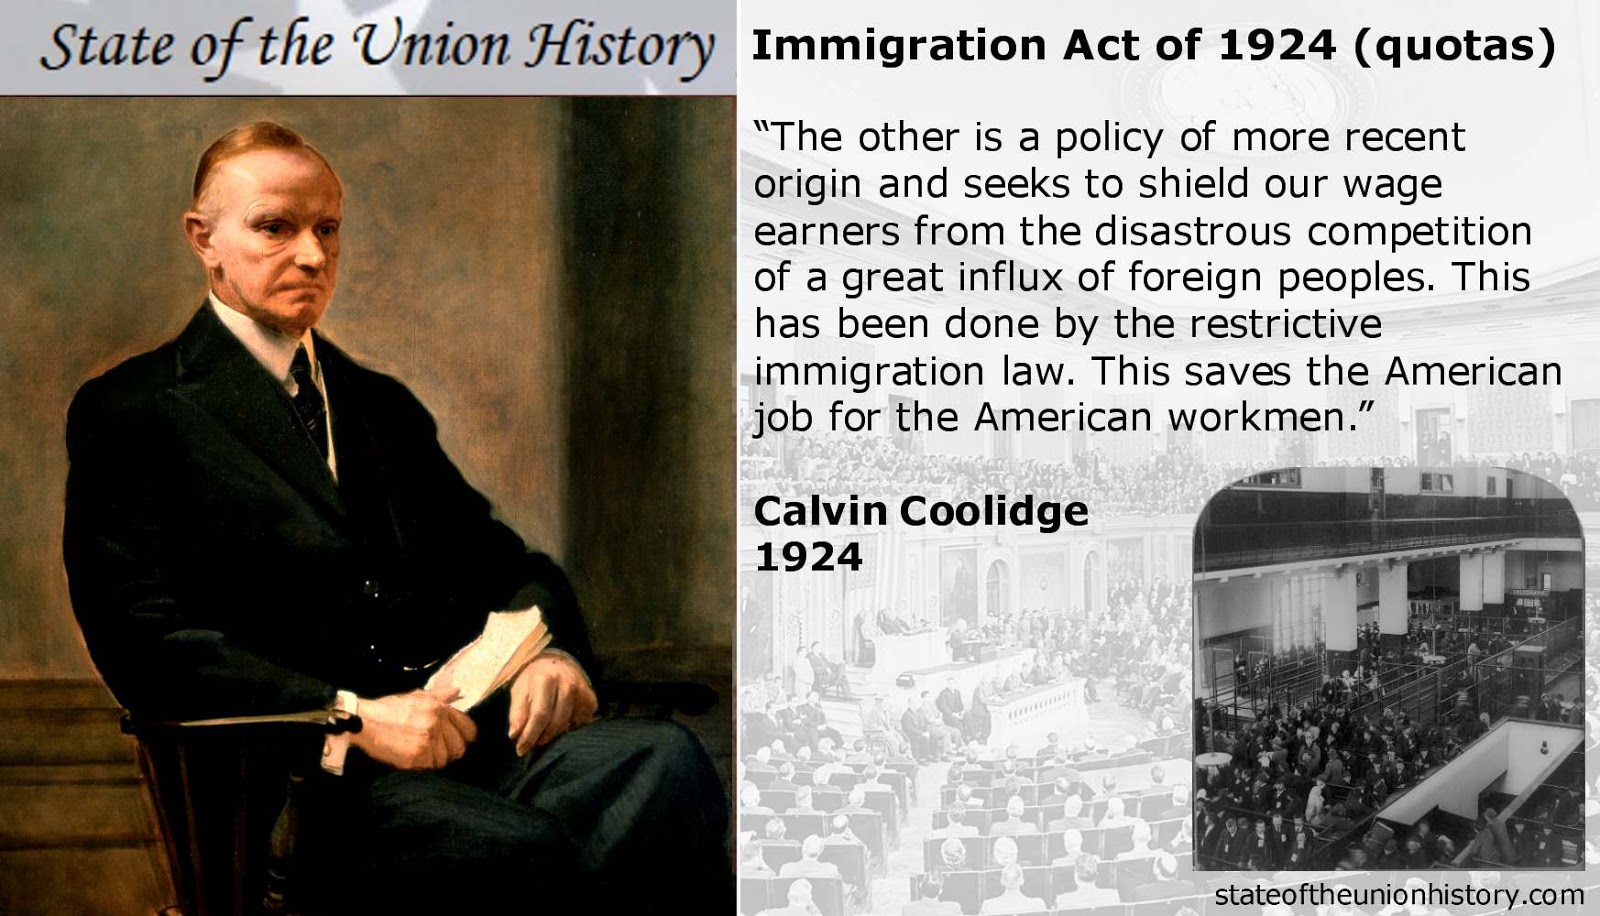 1924 Calvin Coolidge - Immigration Act of 1924 (quota sytem) | State of the  Union History